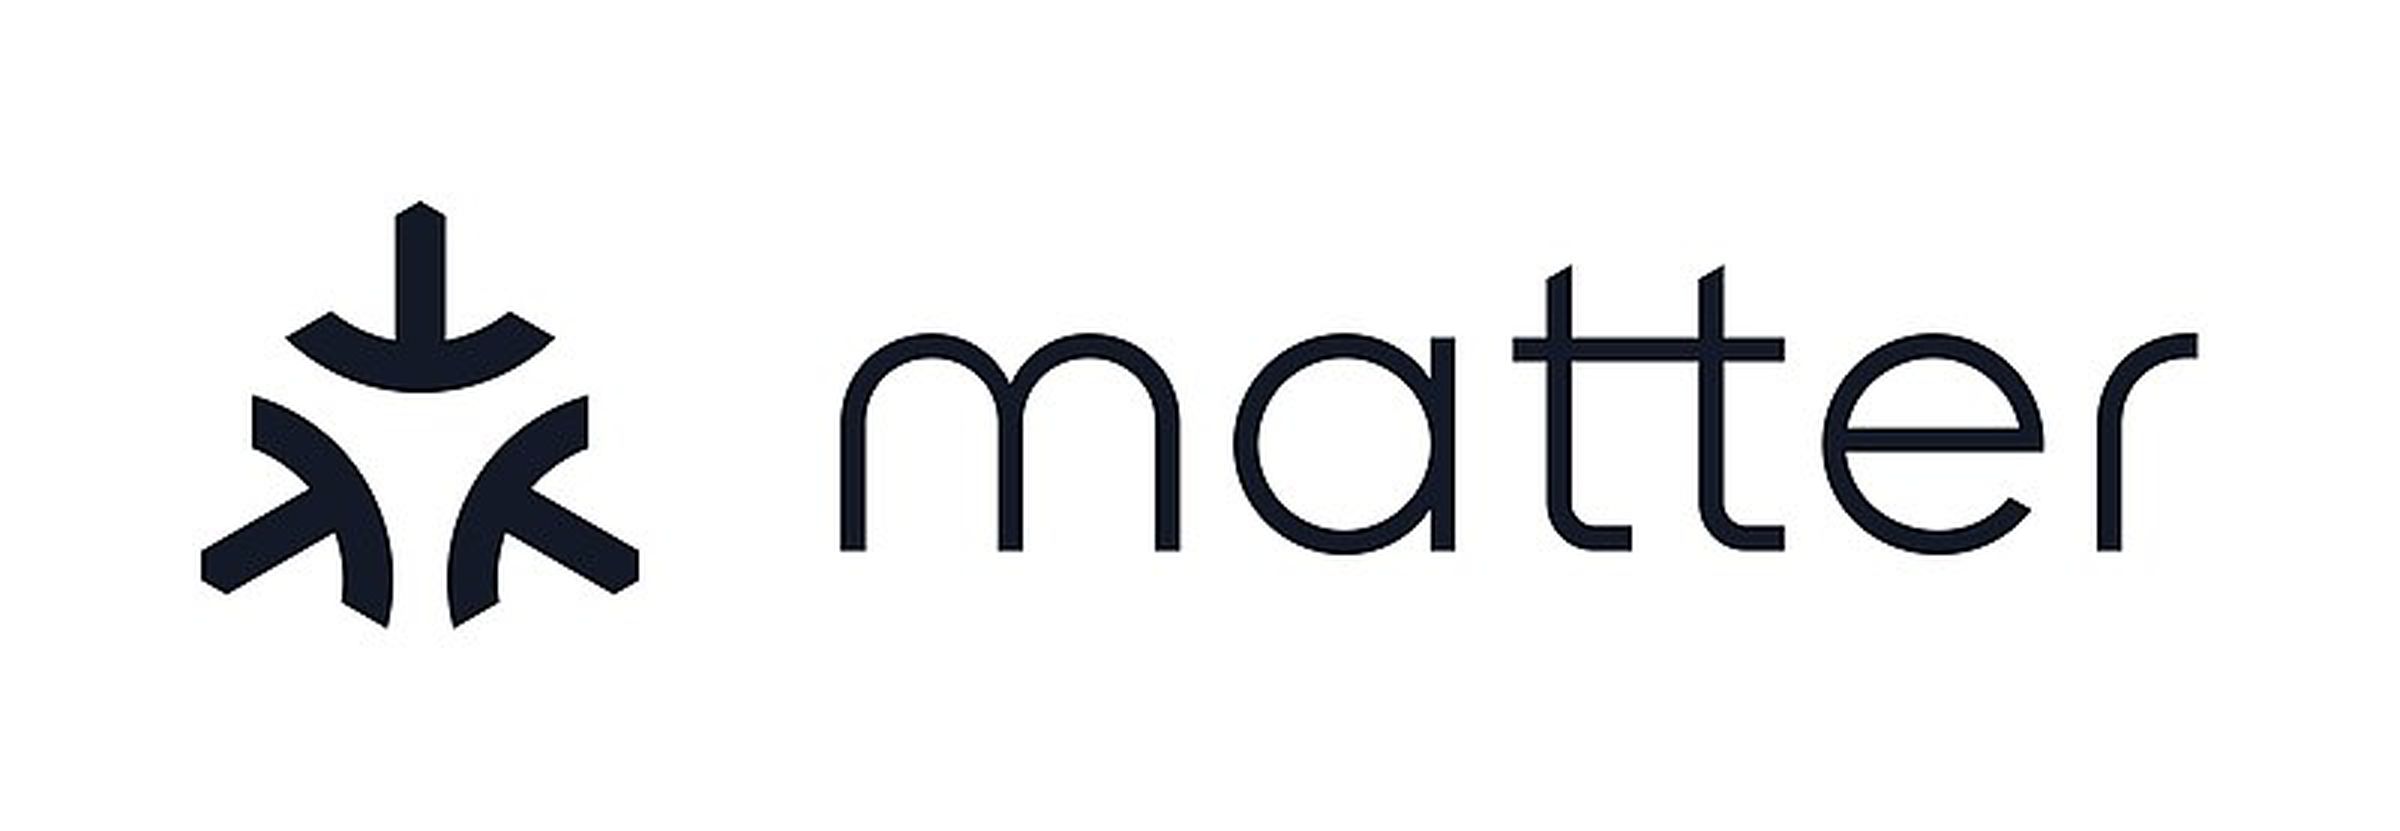 The Matter logo. It’s like a stick person wearing bikini bottoms, and now you can’t unsee it.